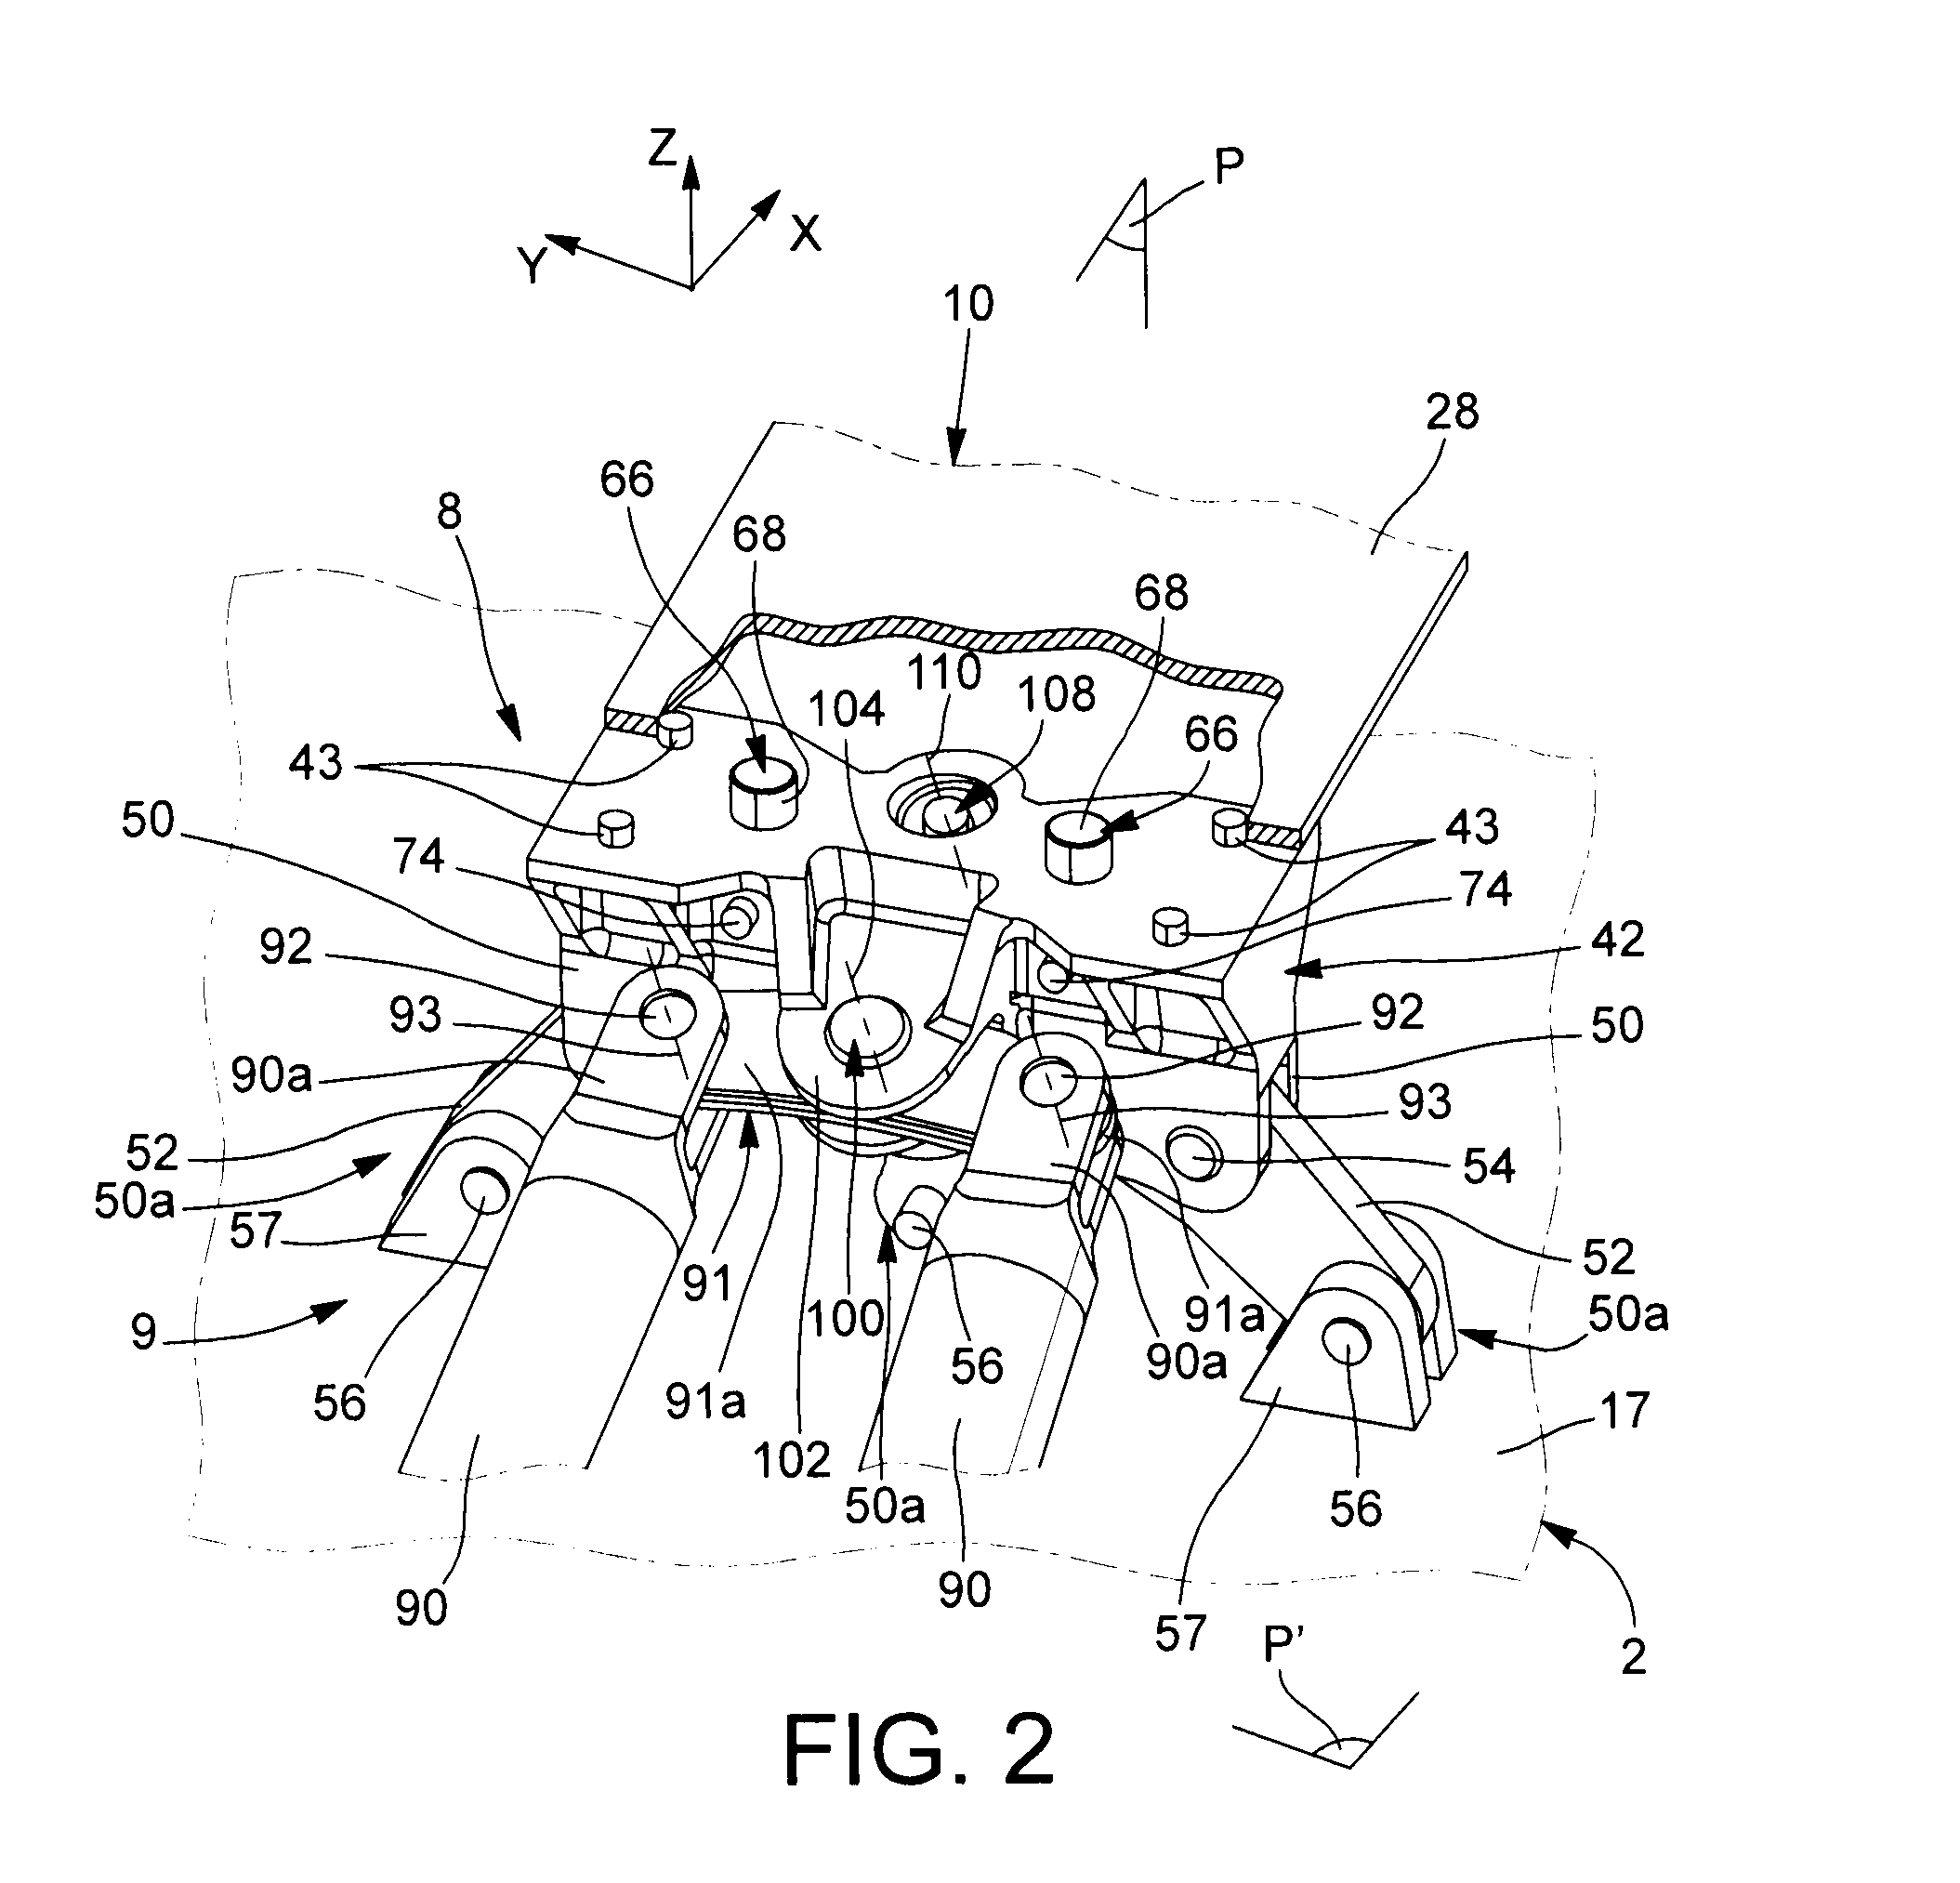 Engine mounting structure for aircraft having a beam spreader connected at four points